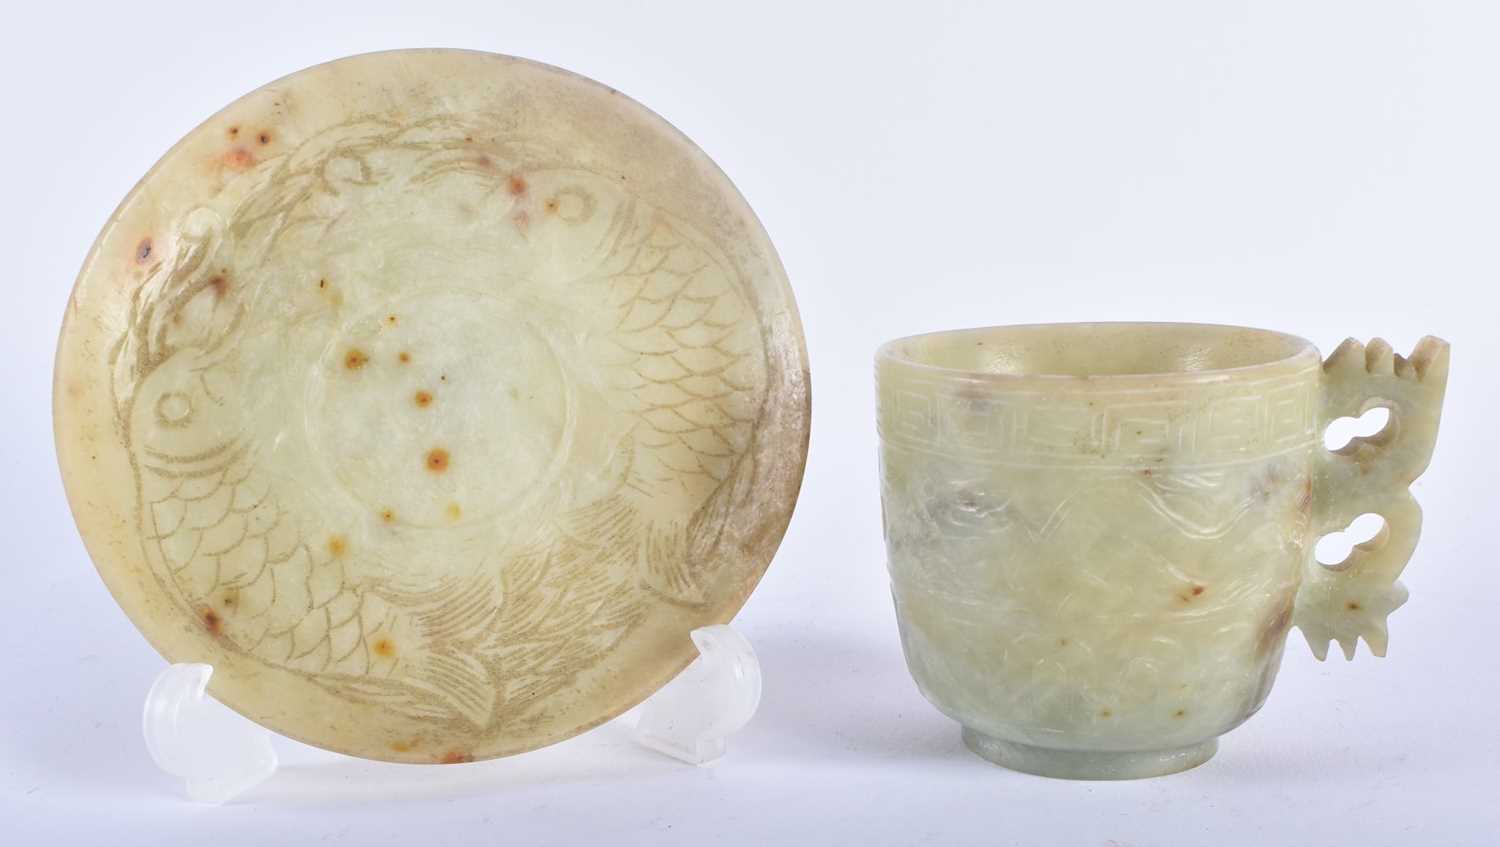 A LATE 19TH CENTURY CHINESE CARVED GREEN STONE CUP AND SAUCER possibly Jade. 12 cm diameter. (2)